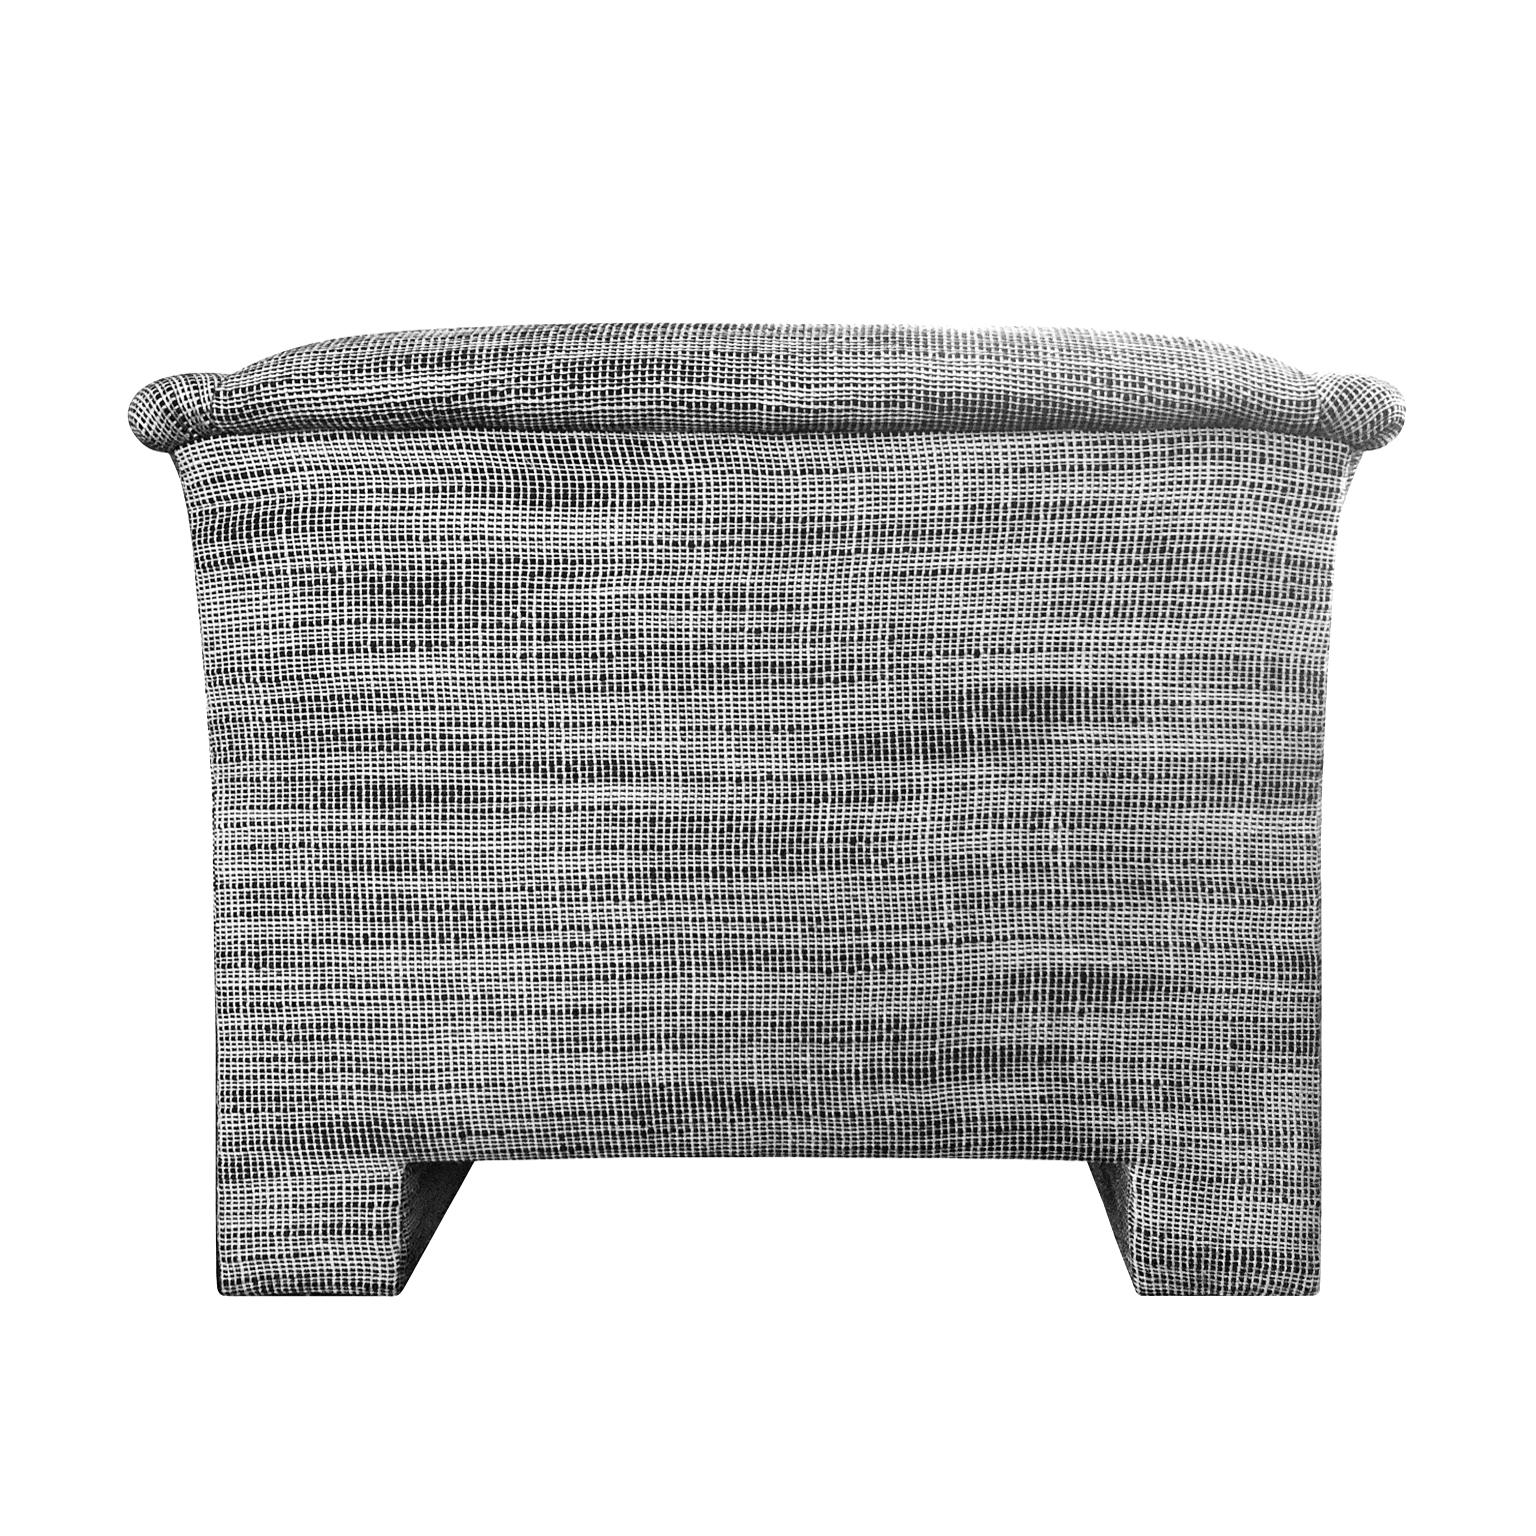 Italian 1970s Modernist Lounge Chair in Black and White Wool Basketweave Upholstery For Sale